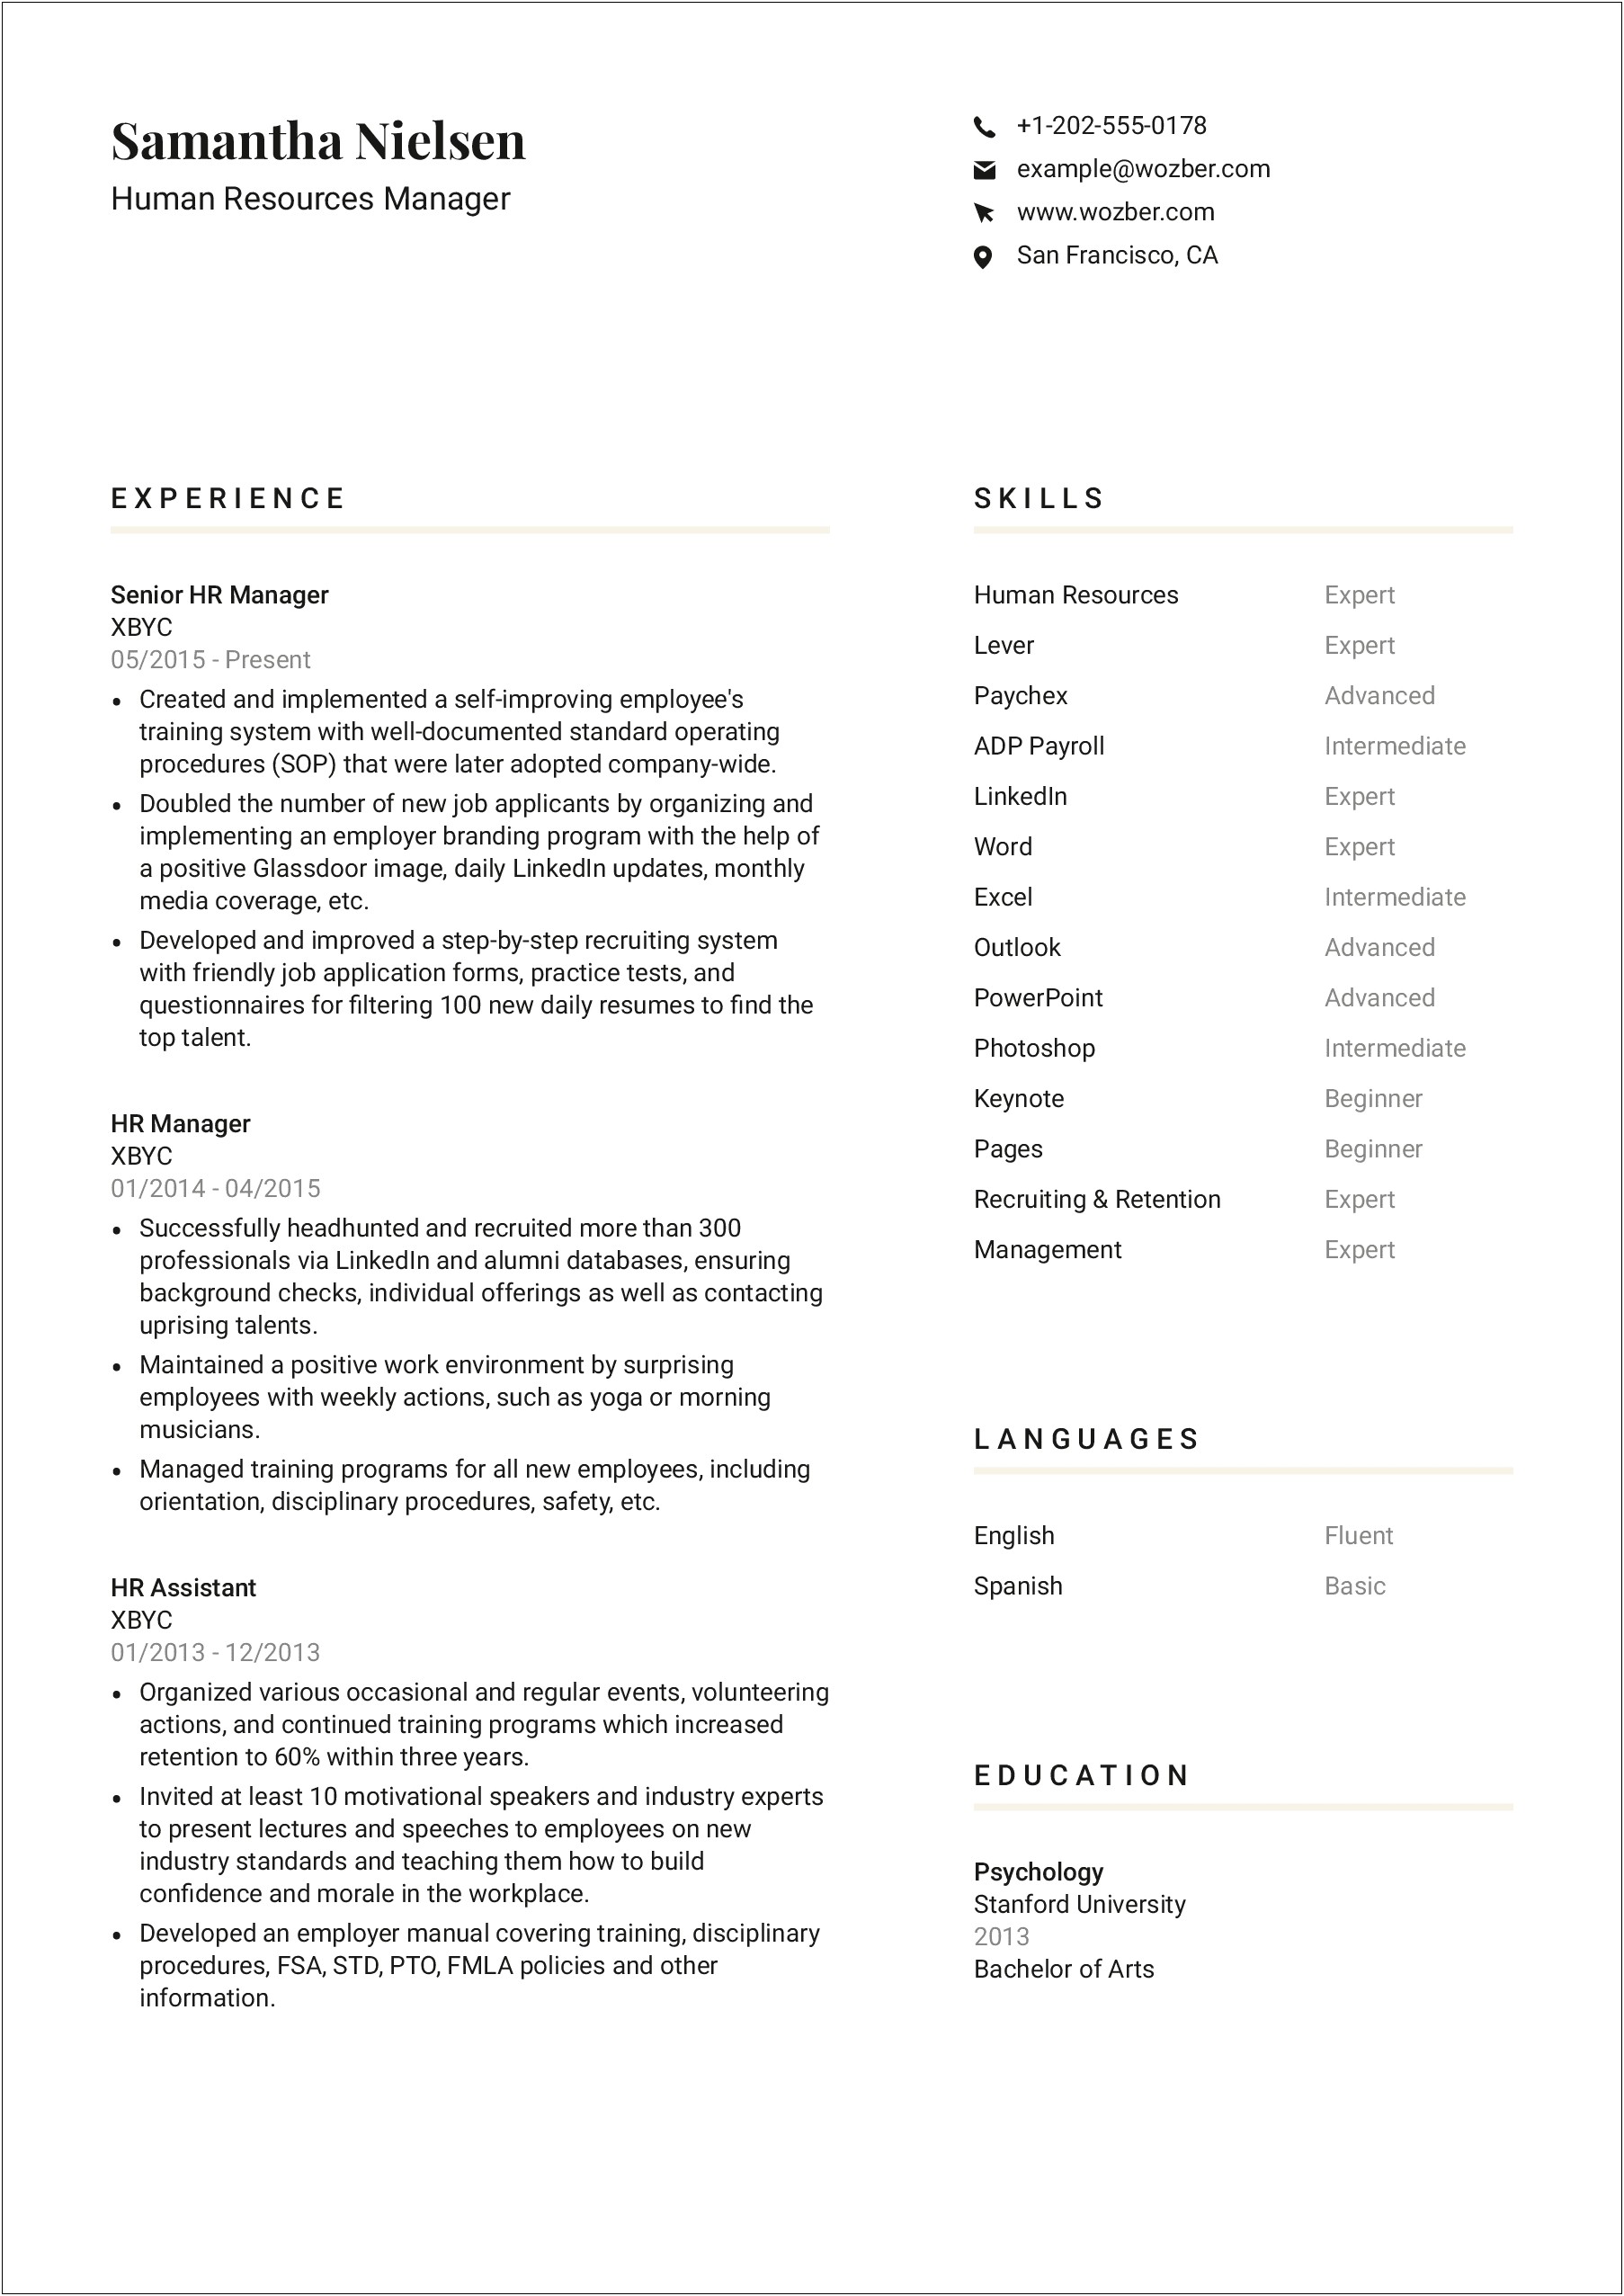 Resume Objective For Beginning Human Resources